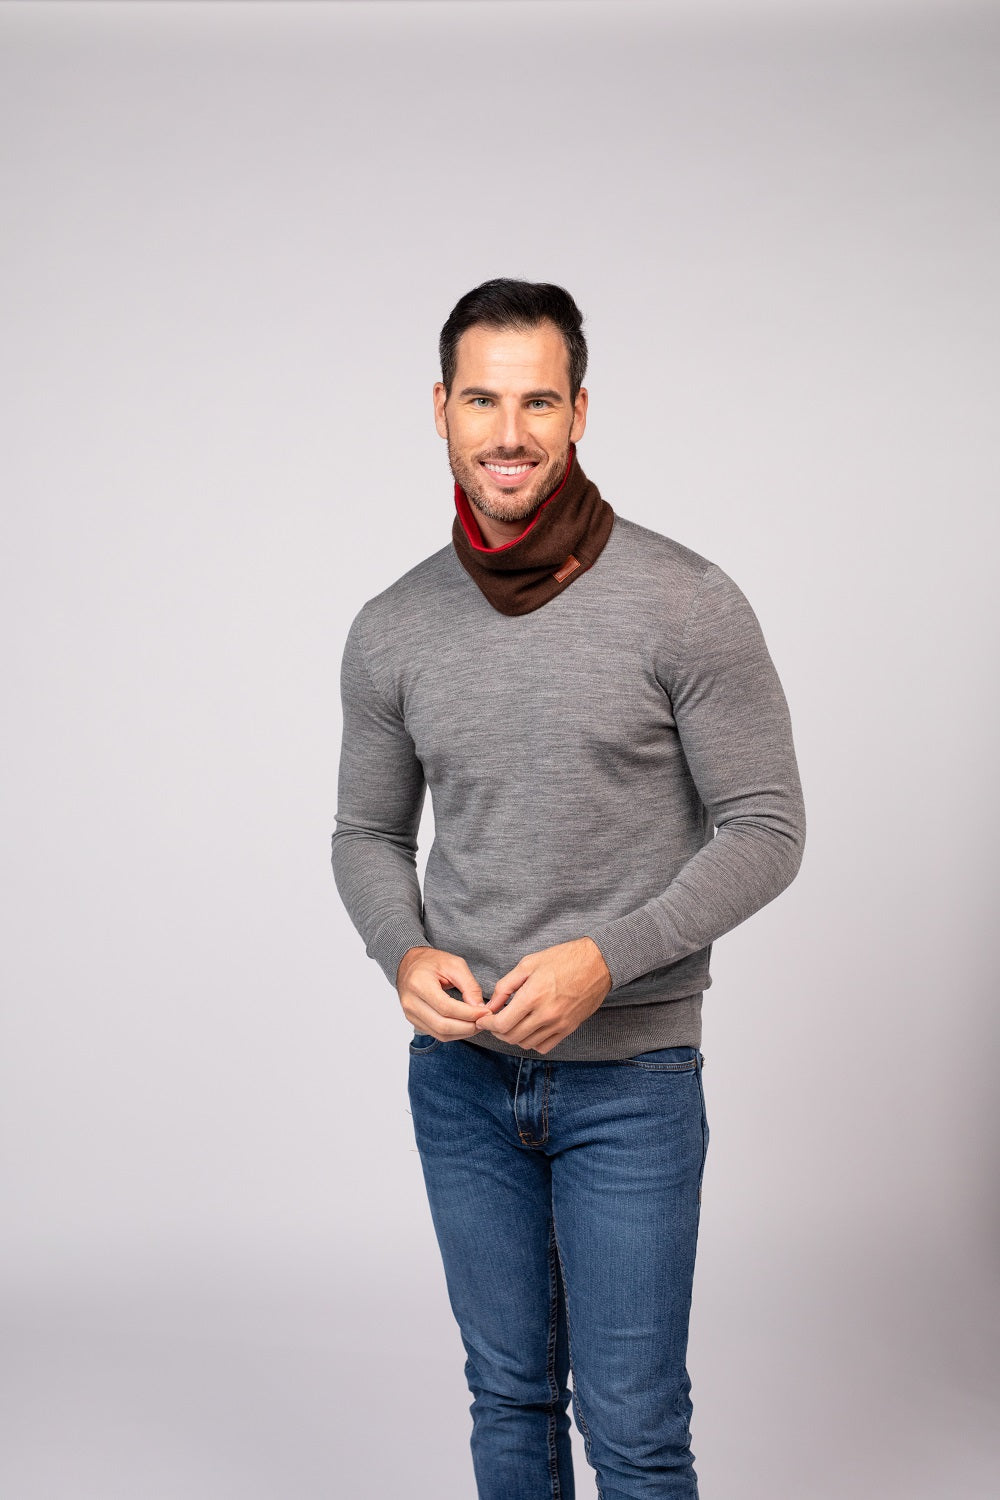 Red and Brown - Cashmere Reversible Neck Warmer for Men